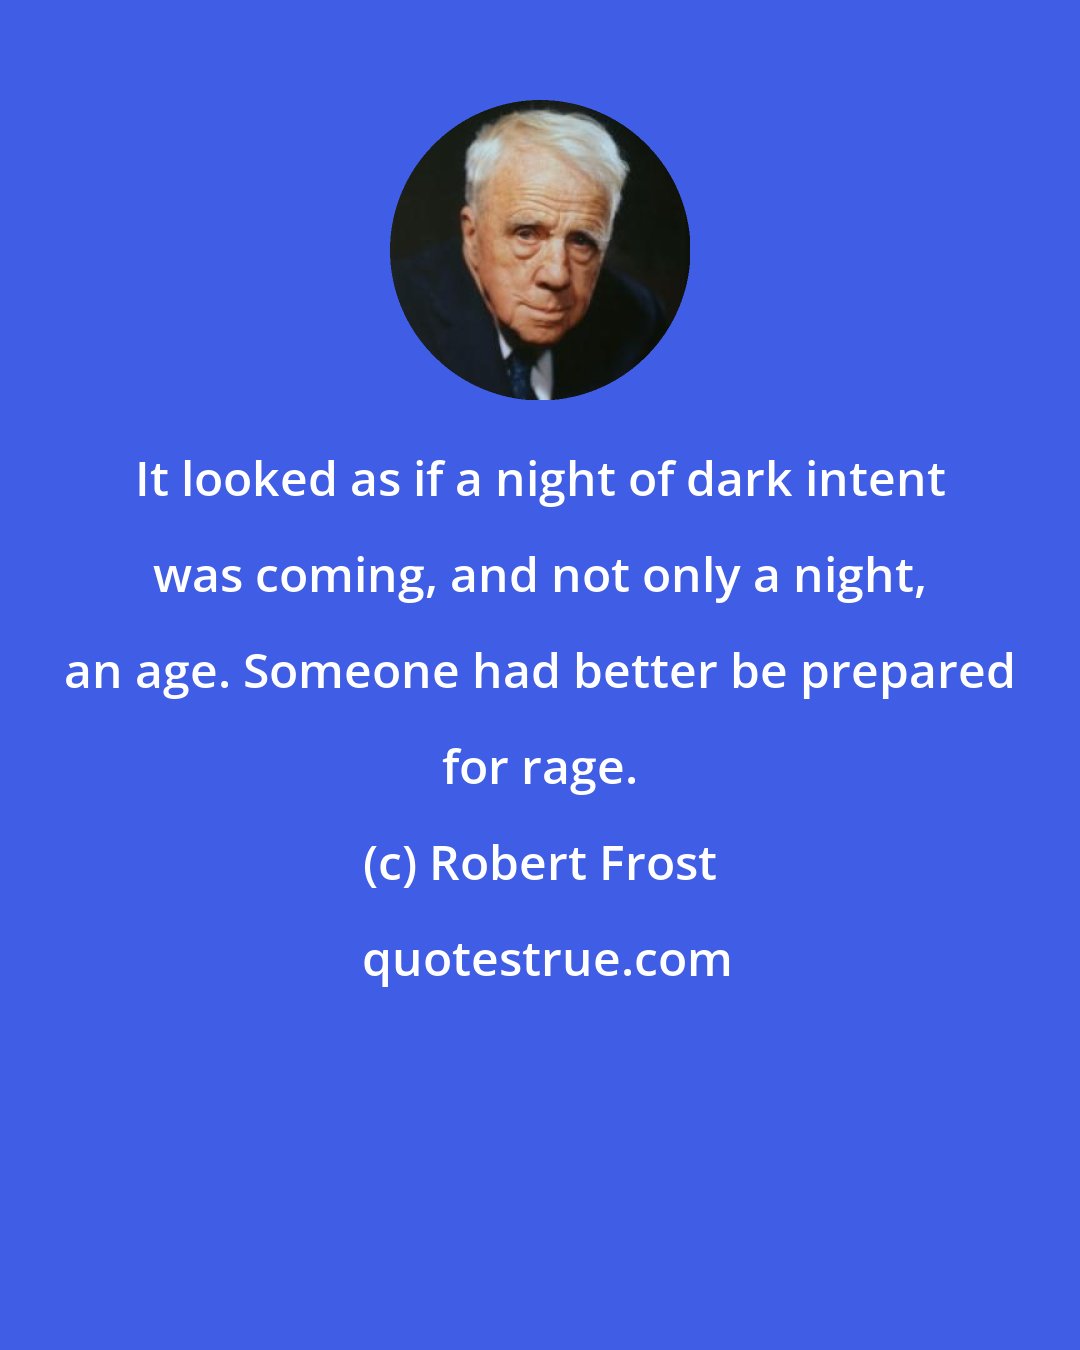 Robert Frost: It looked as if a night of dark intent was coming, and not only a night, an age. Someone had better be prepared for rage.